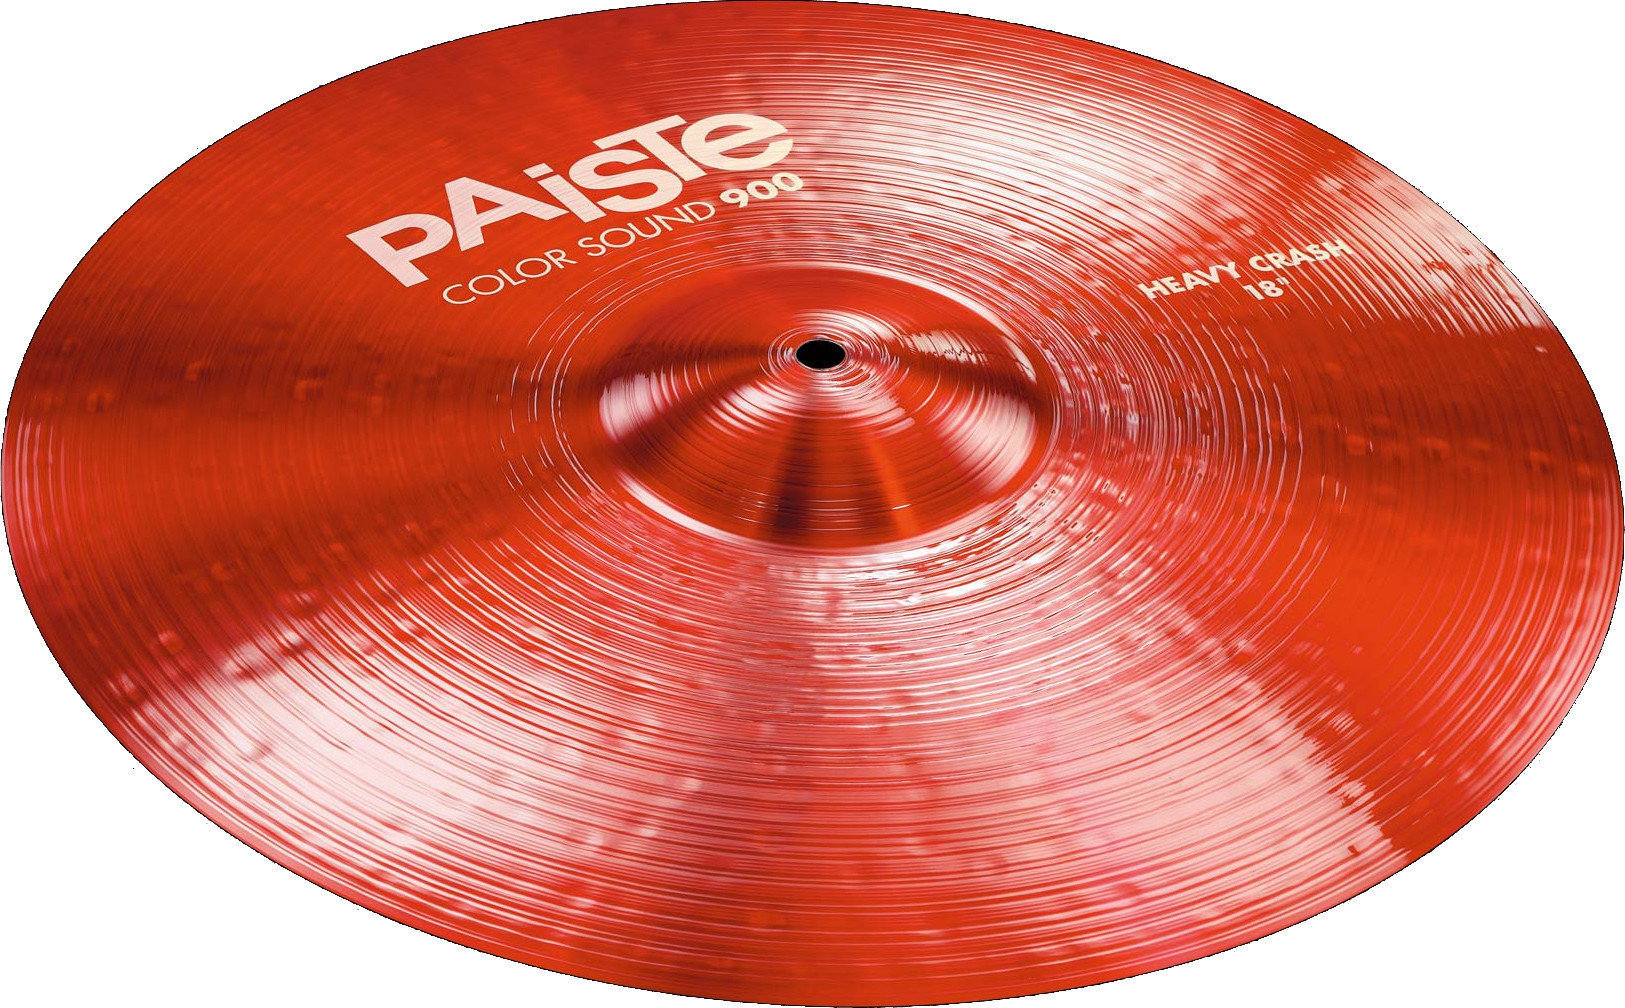 Crash Cymbal Paiste Color Sound 900  Heavy Crash Cymbal 17" Red